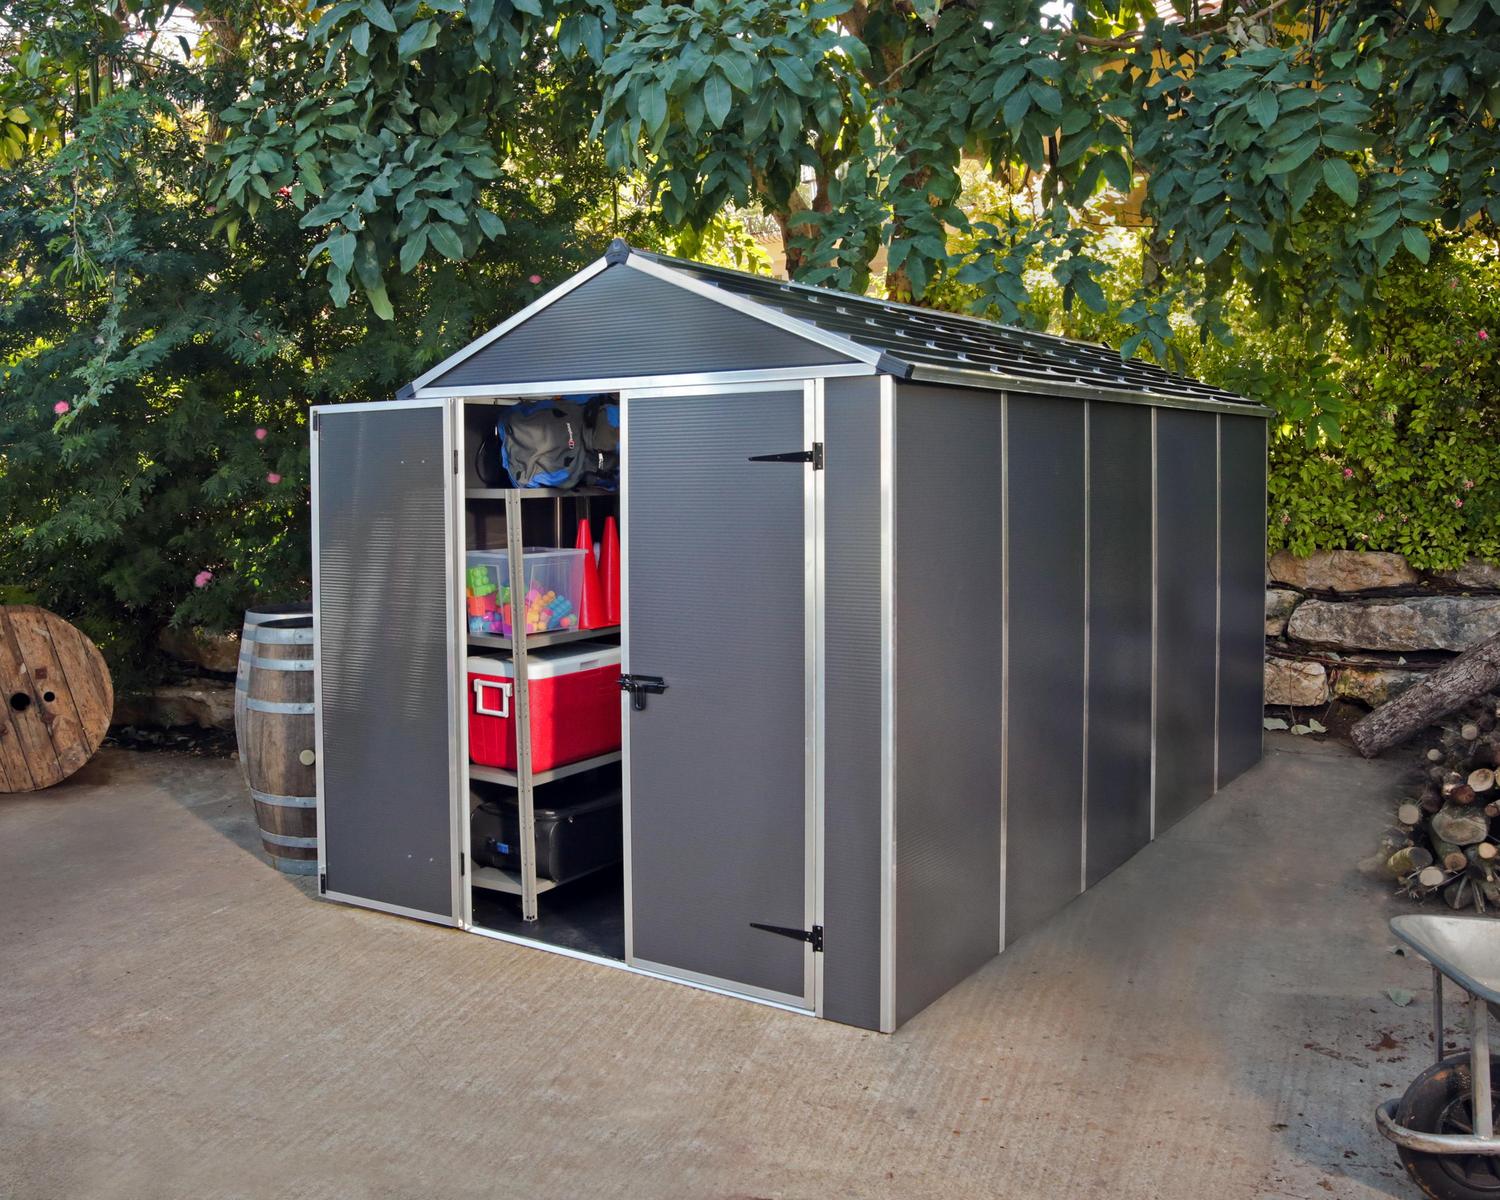 Rubicon 6&#039; x 12&#039; Plastic Garden Shed with Open Doors Dark Grey Polycarbonate Walls and Aluminium Frame